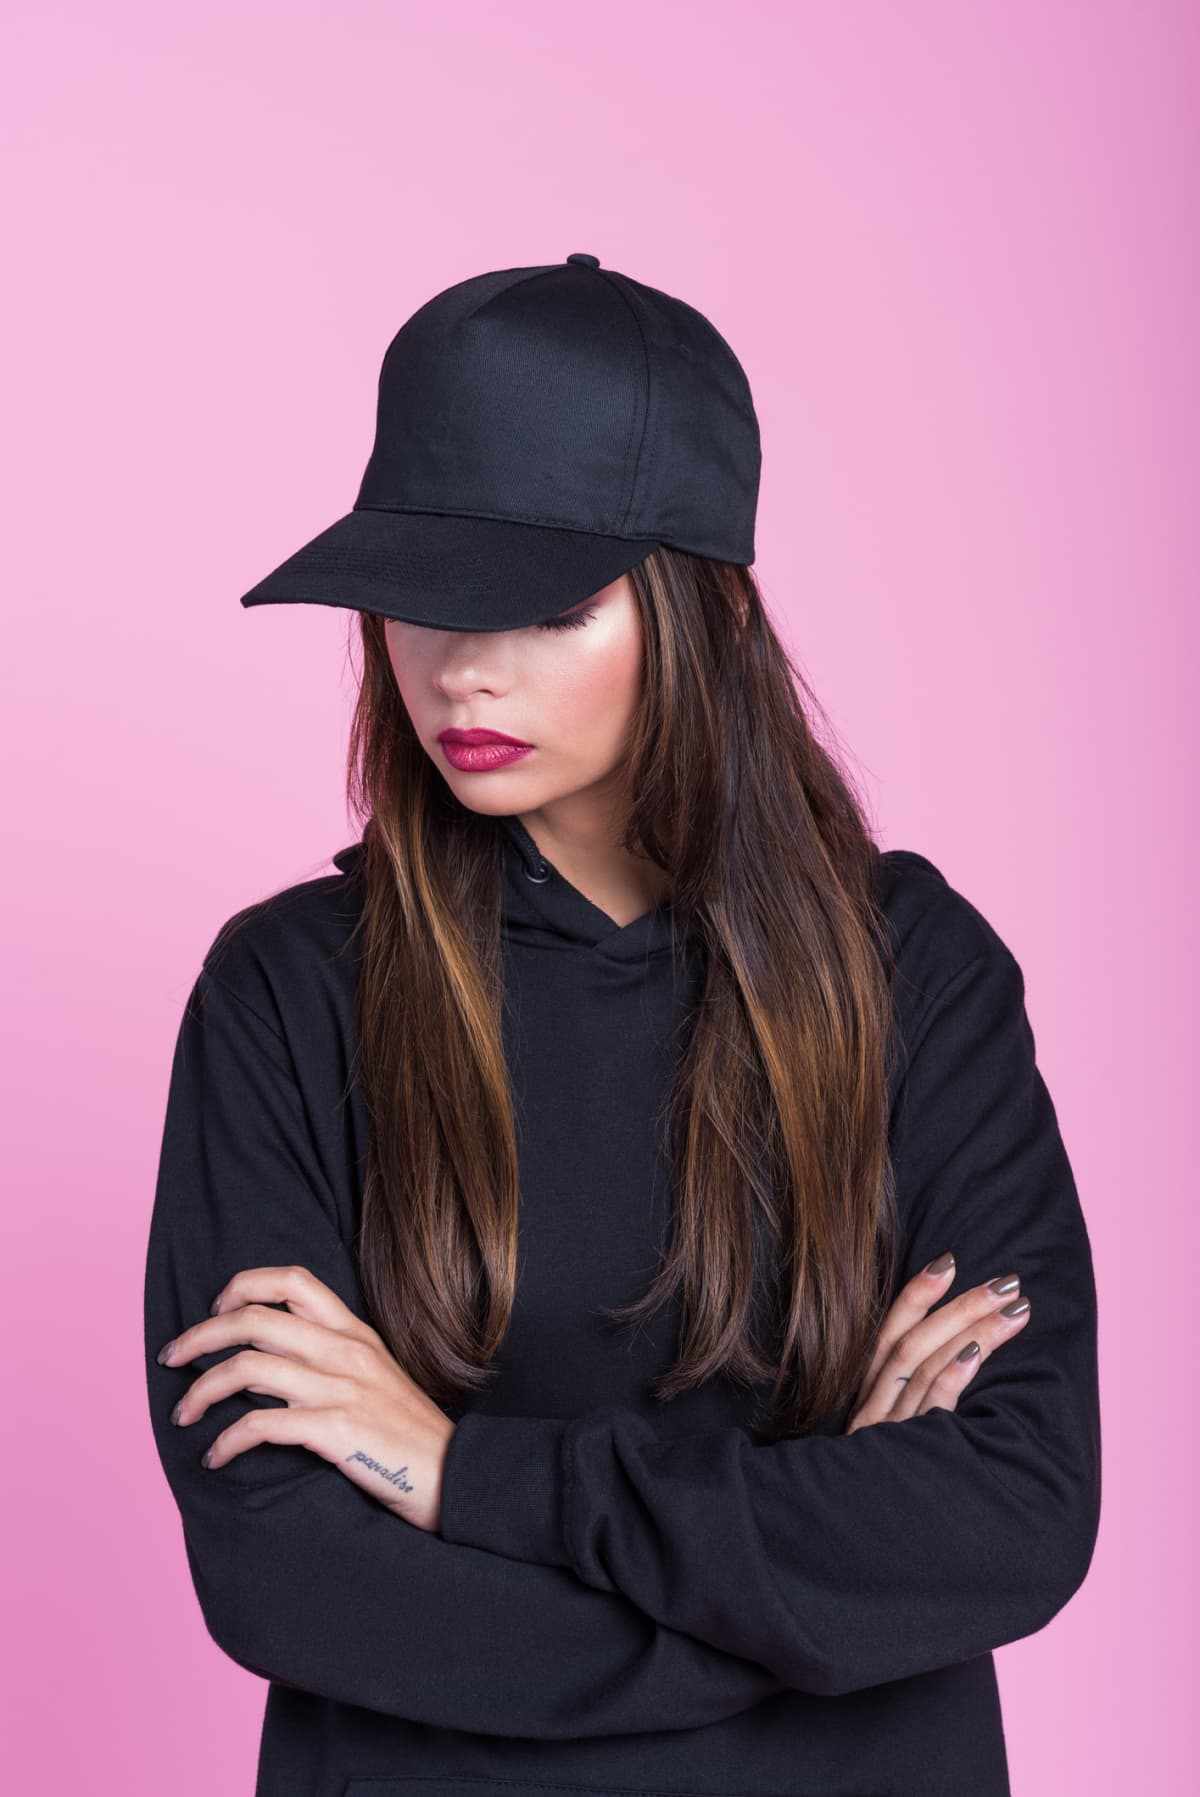 Studio portrait of a young woman wearing a laser cap disguised as a baseball cap